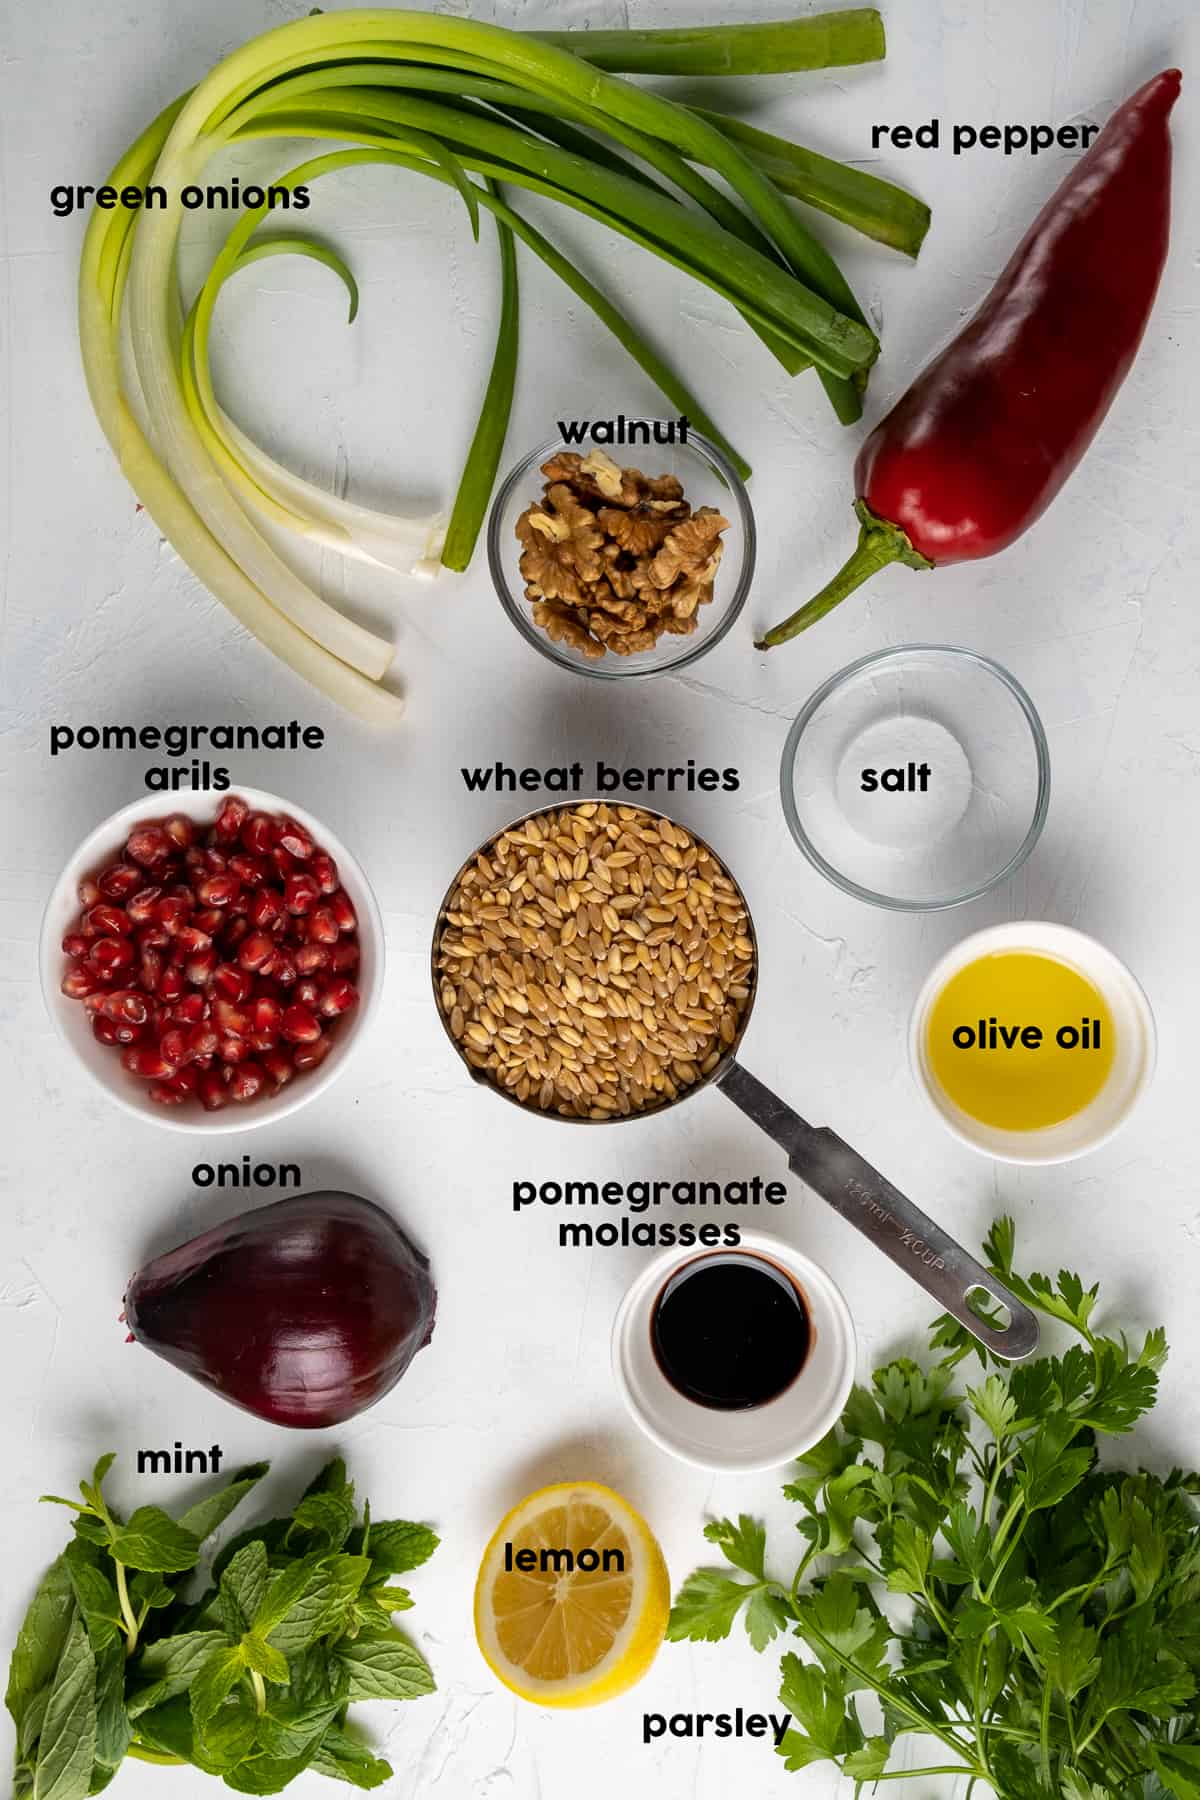 Green onions, one sweet red pepper, fresh parsley and mint, wheat berries, red onion, olive oil, pomegranate molasses, half lemon, pomegranate arils on a light background.